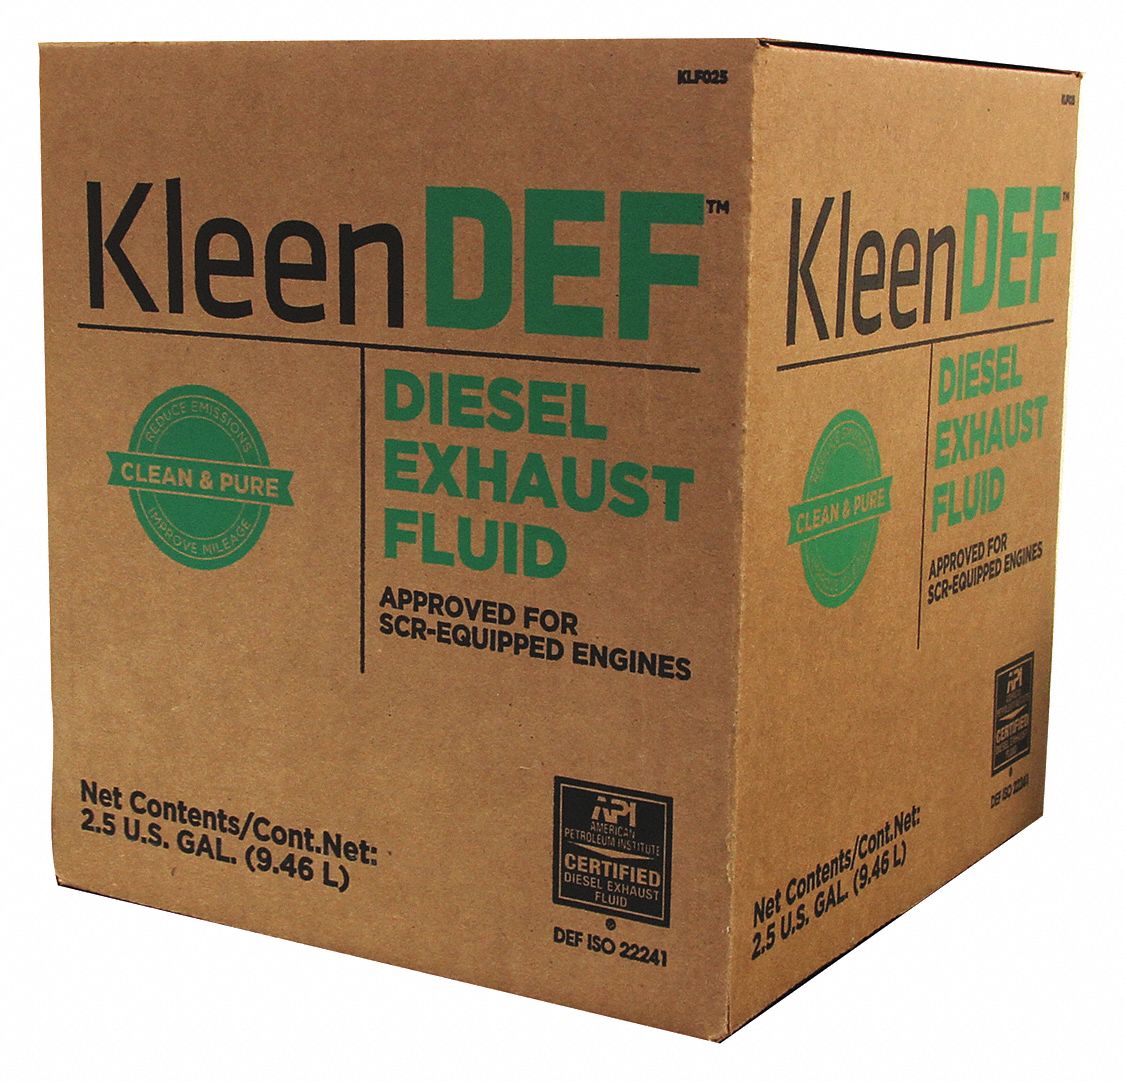 Diesel Exhaust Fluid: Kleen DEF, 2.5 gal Container Size, Box, API/ISO-22241-1